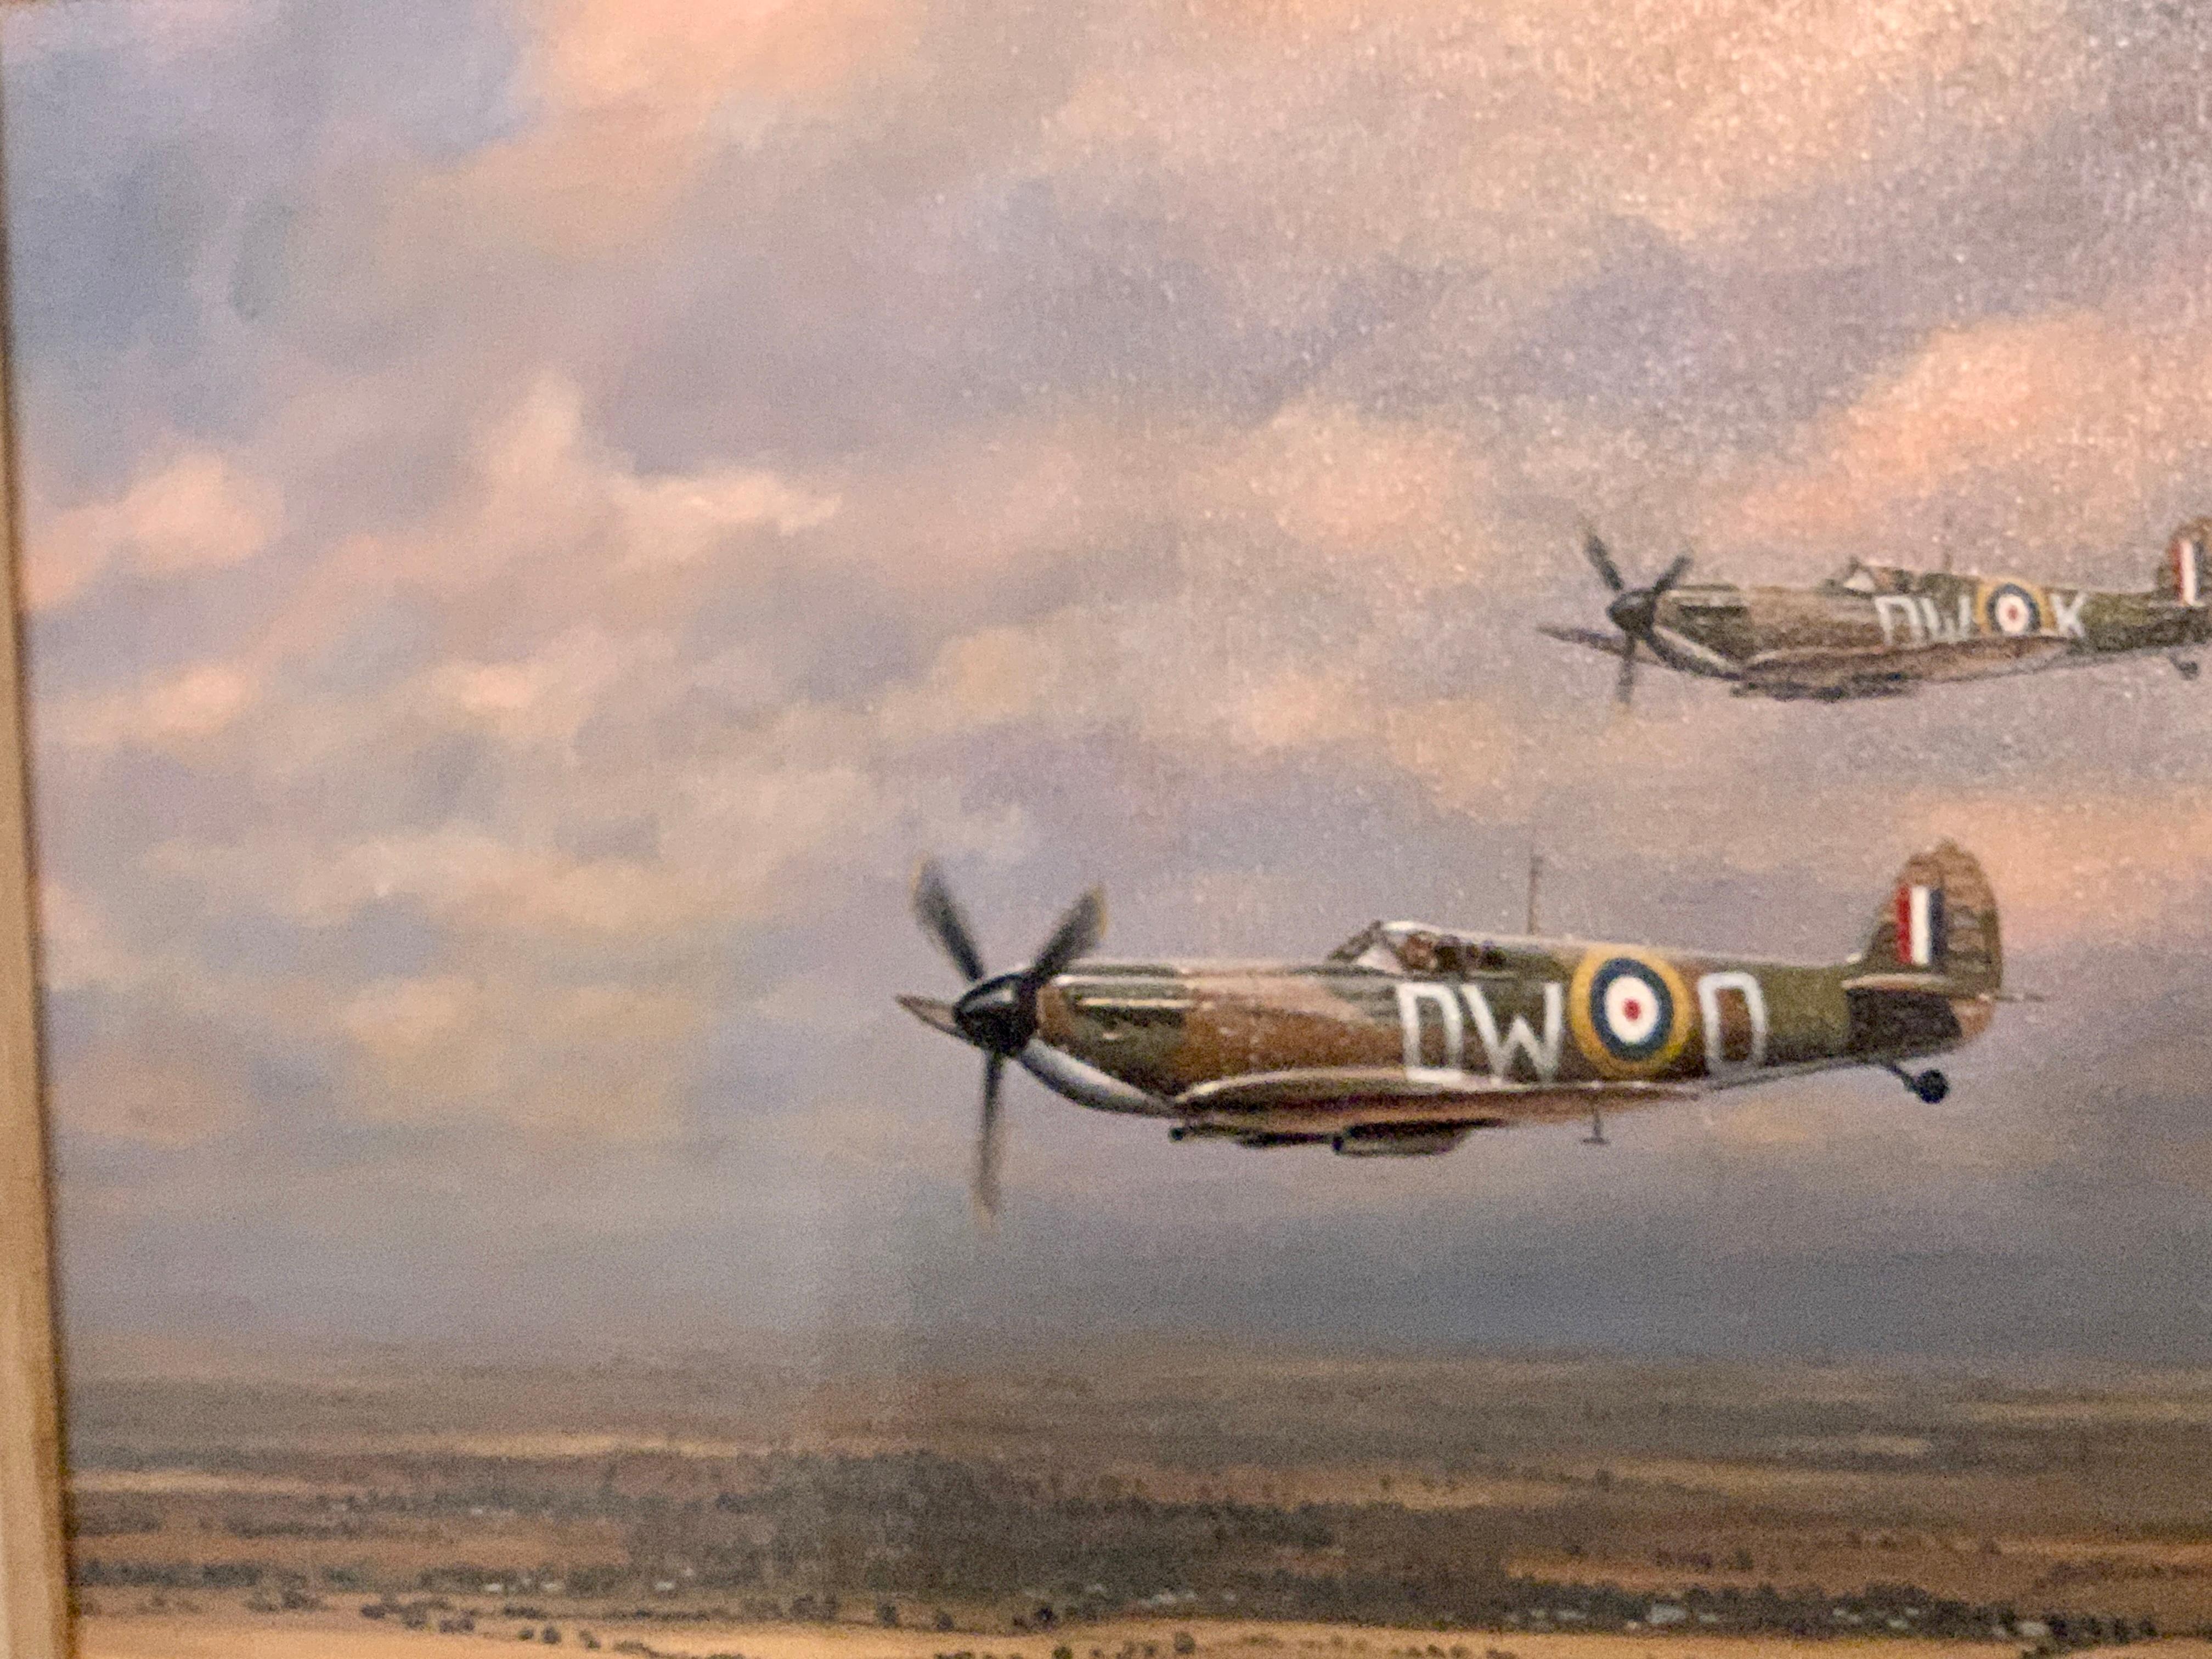 Two British Spitfires flying over the English landscape, 20th century  - Realist Painting by Roland Wong